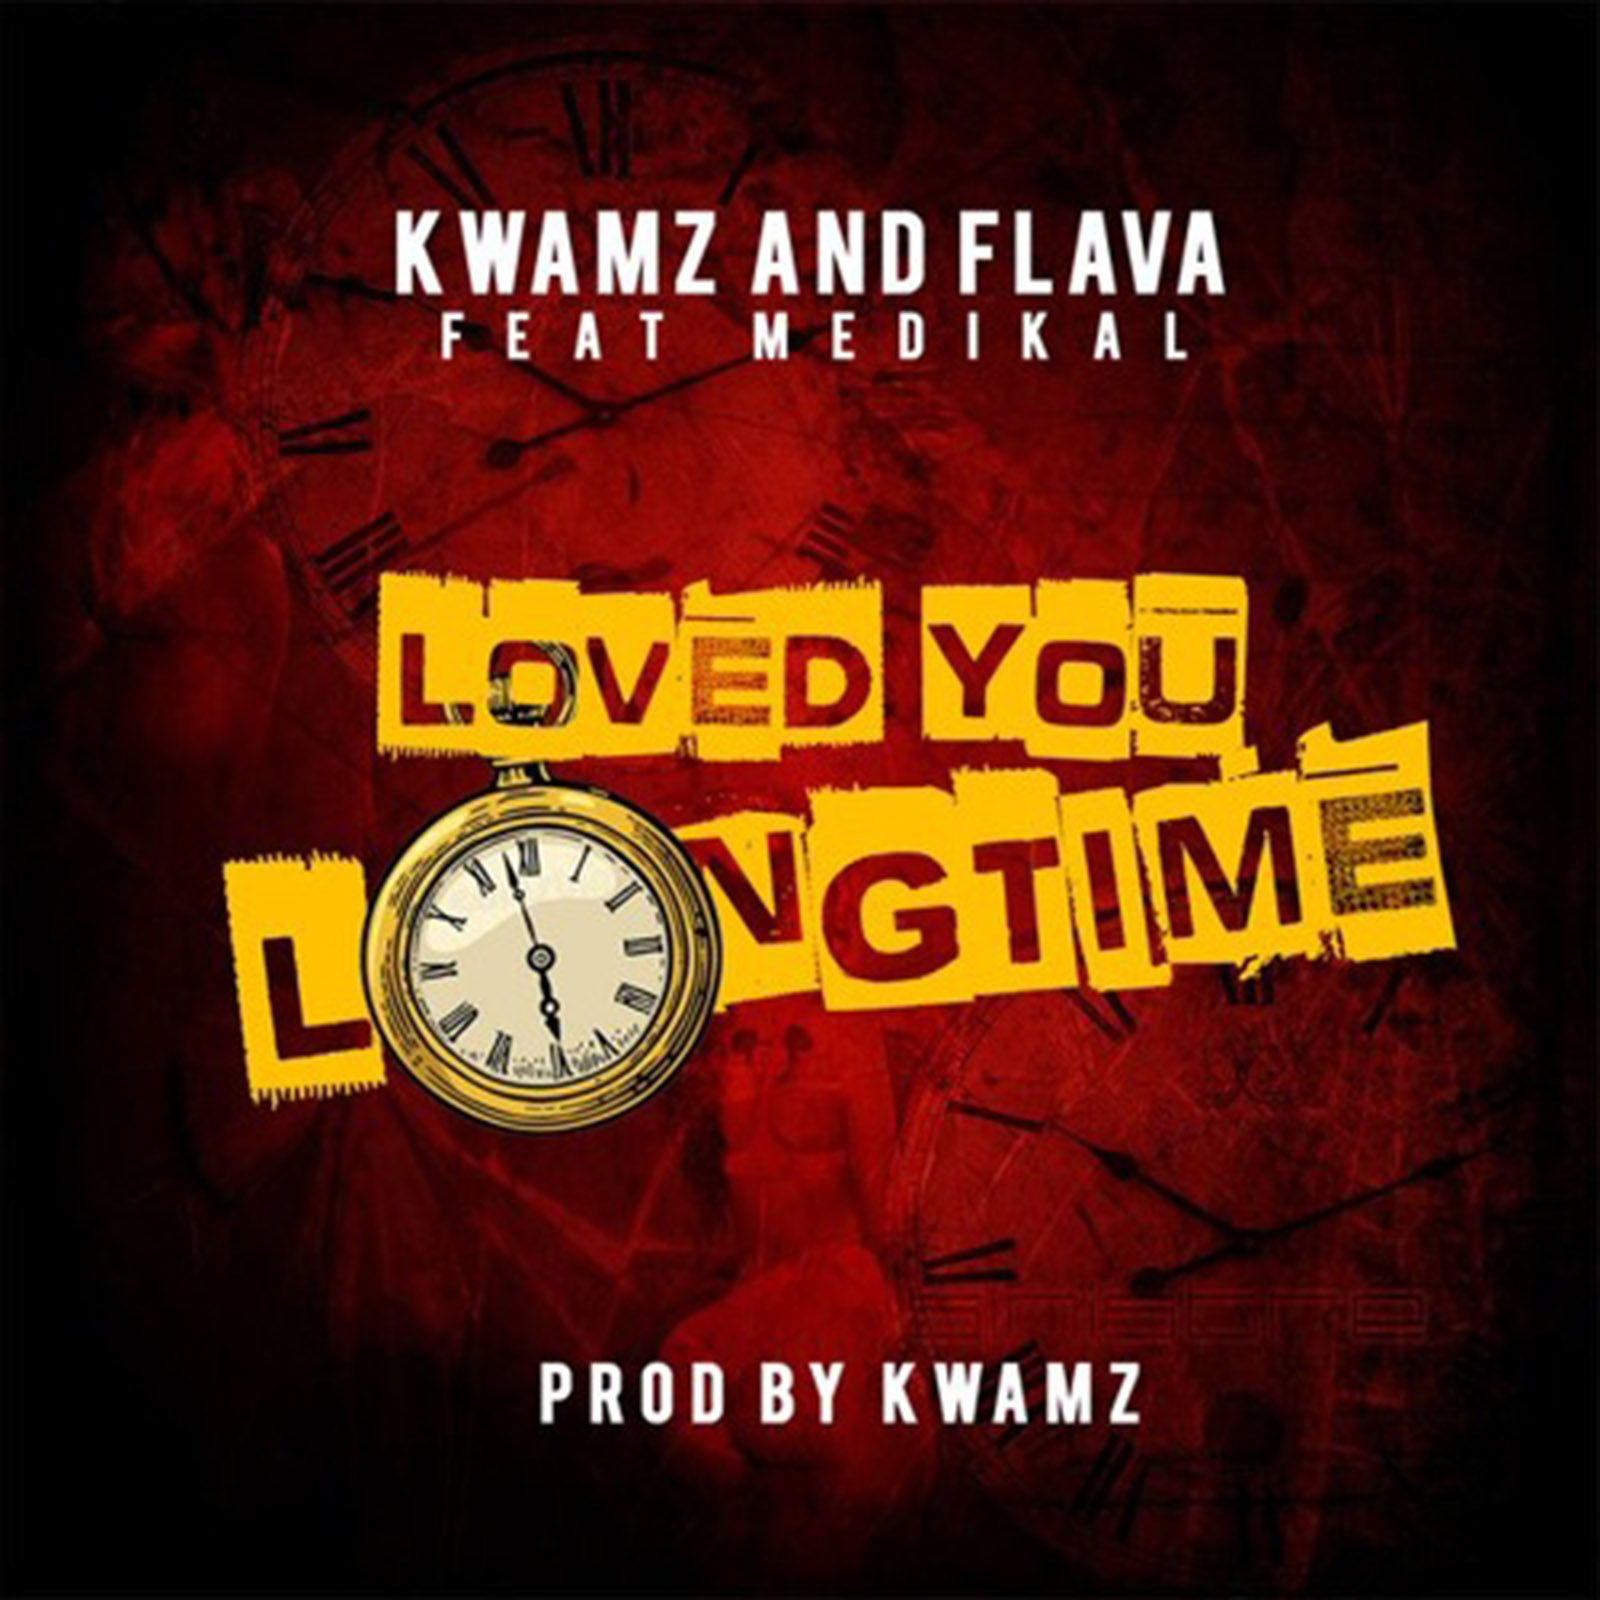 Love You Long Time by Kwamz And Flava feat. Medikal